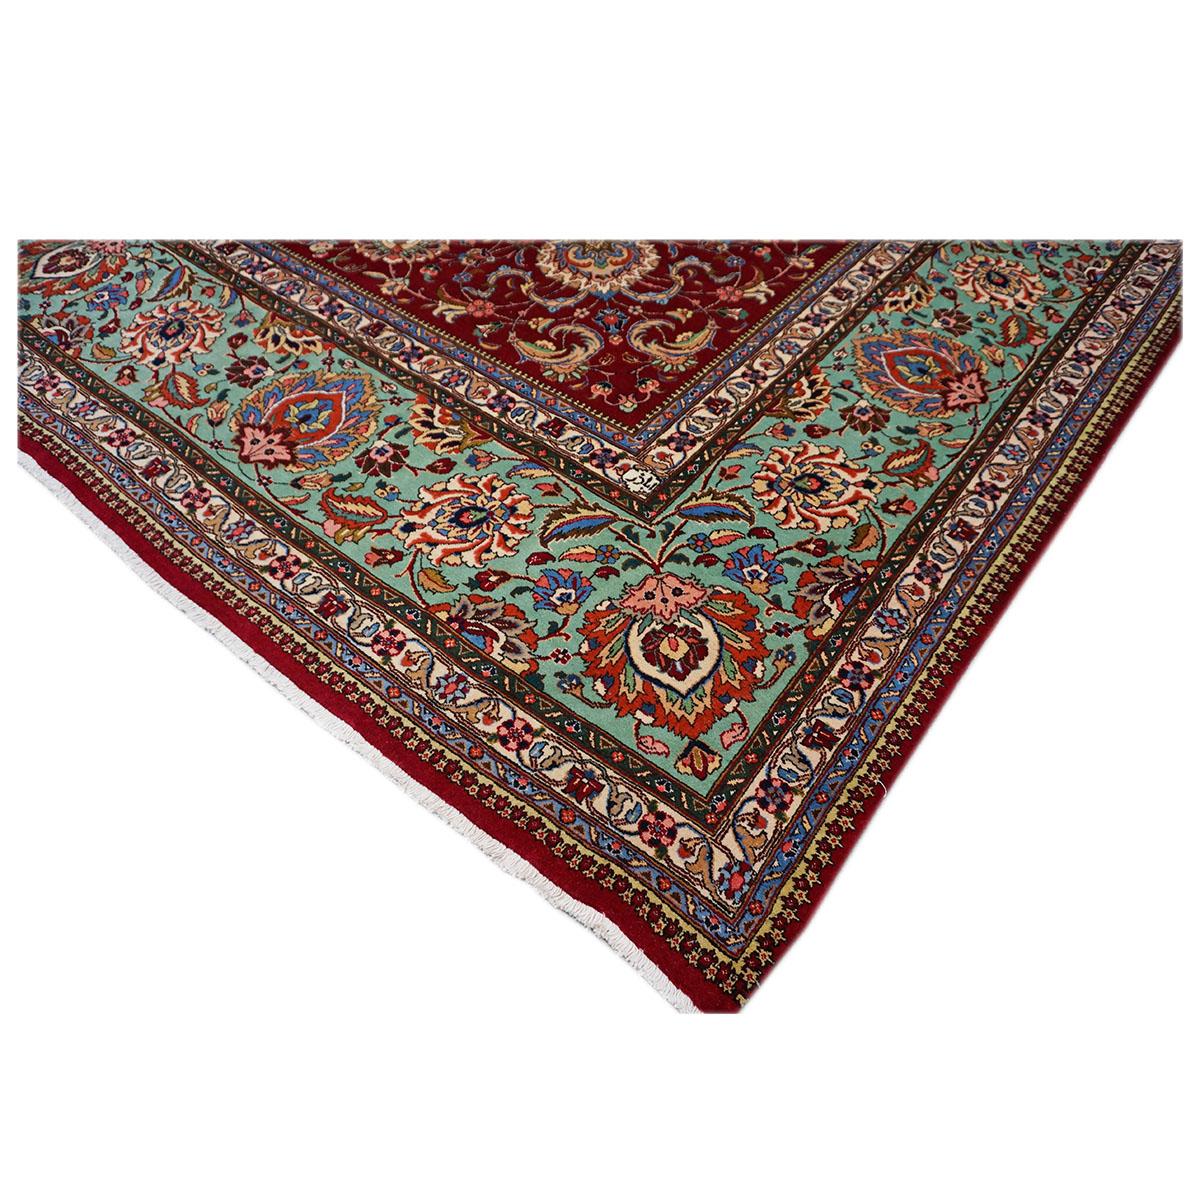 Antique 1940s Persian Tabriz Pahlavi 11x16 Red, Teal, & Ivory Handmade Area Rug For Sale 1